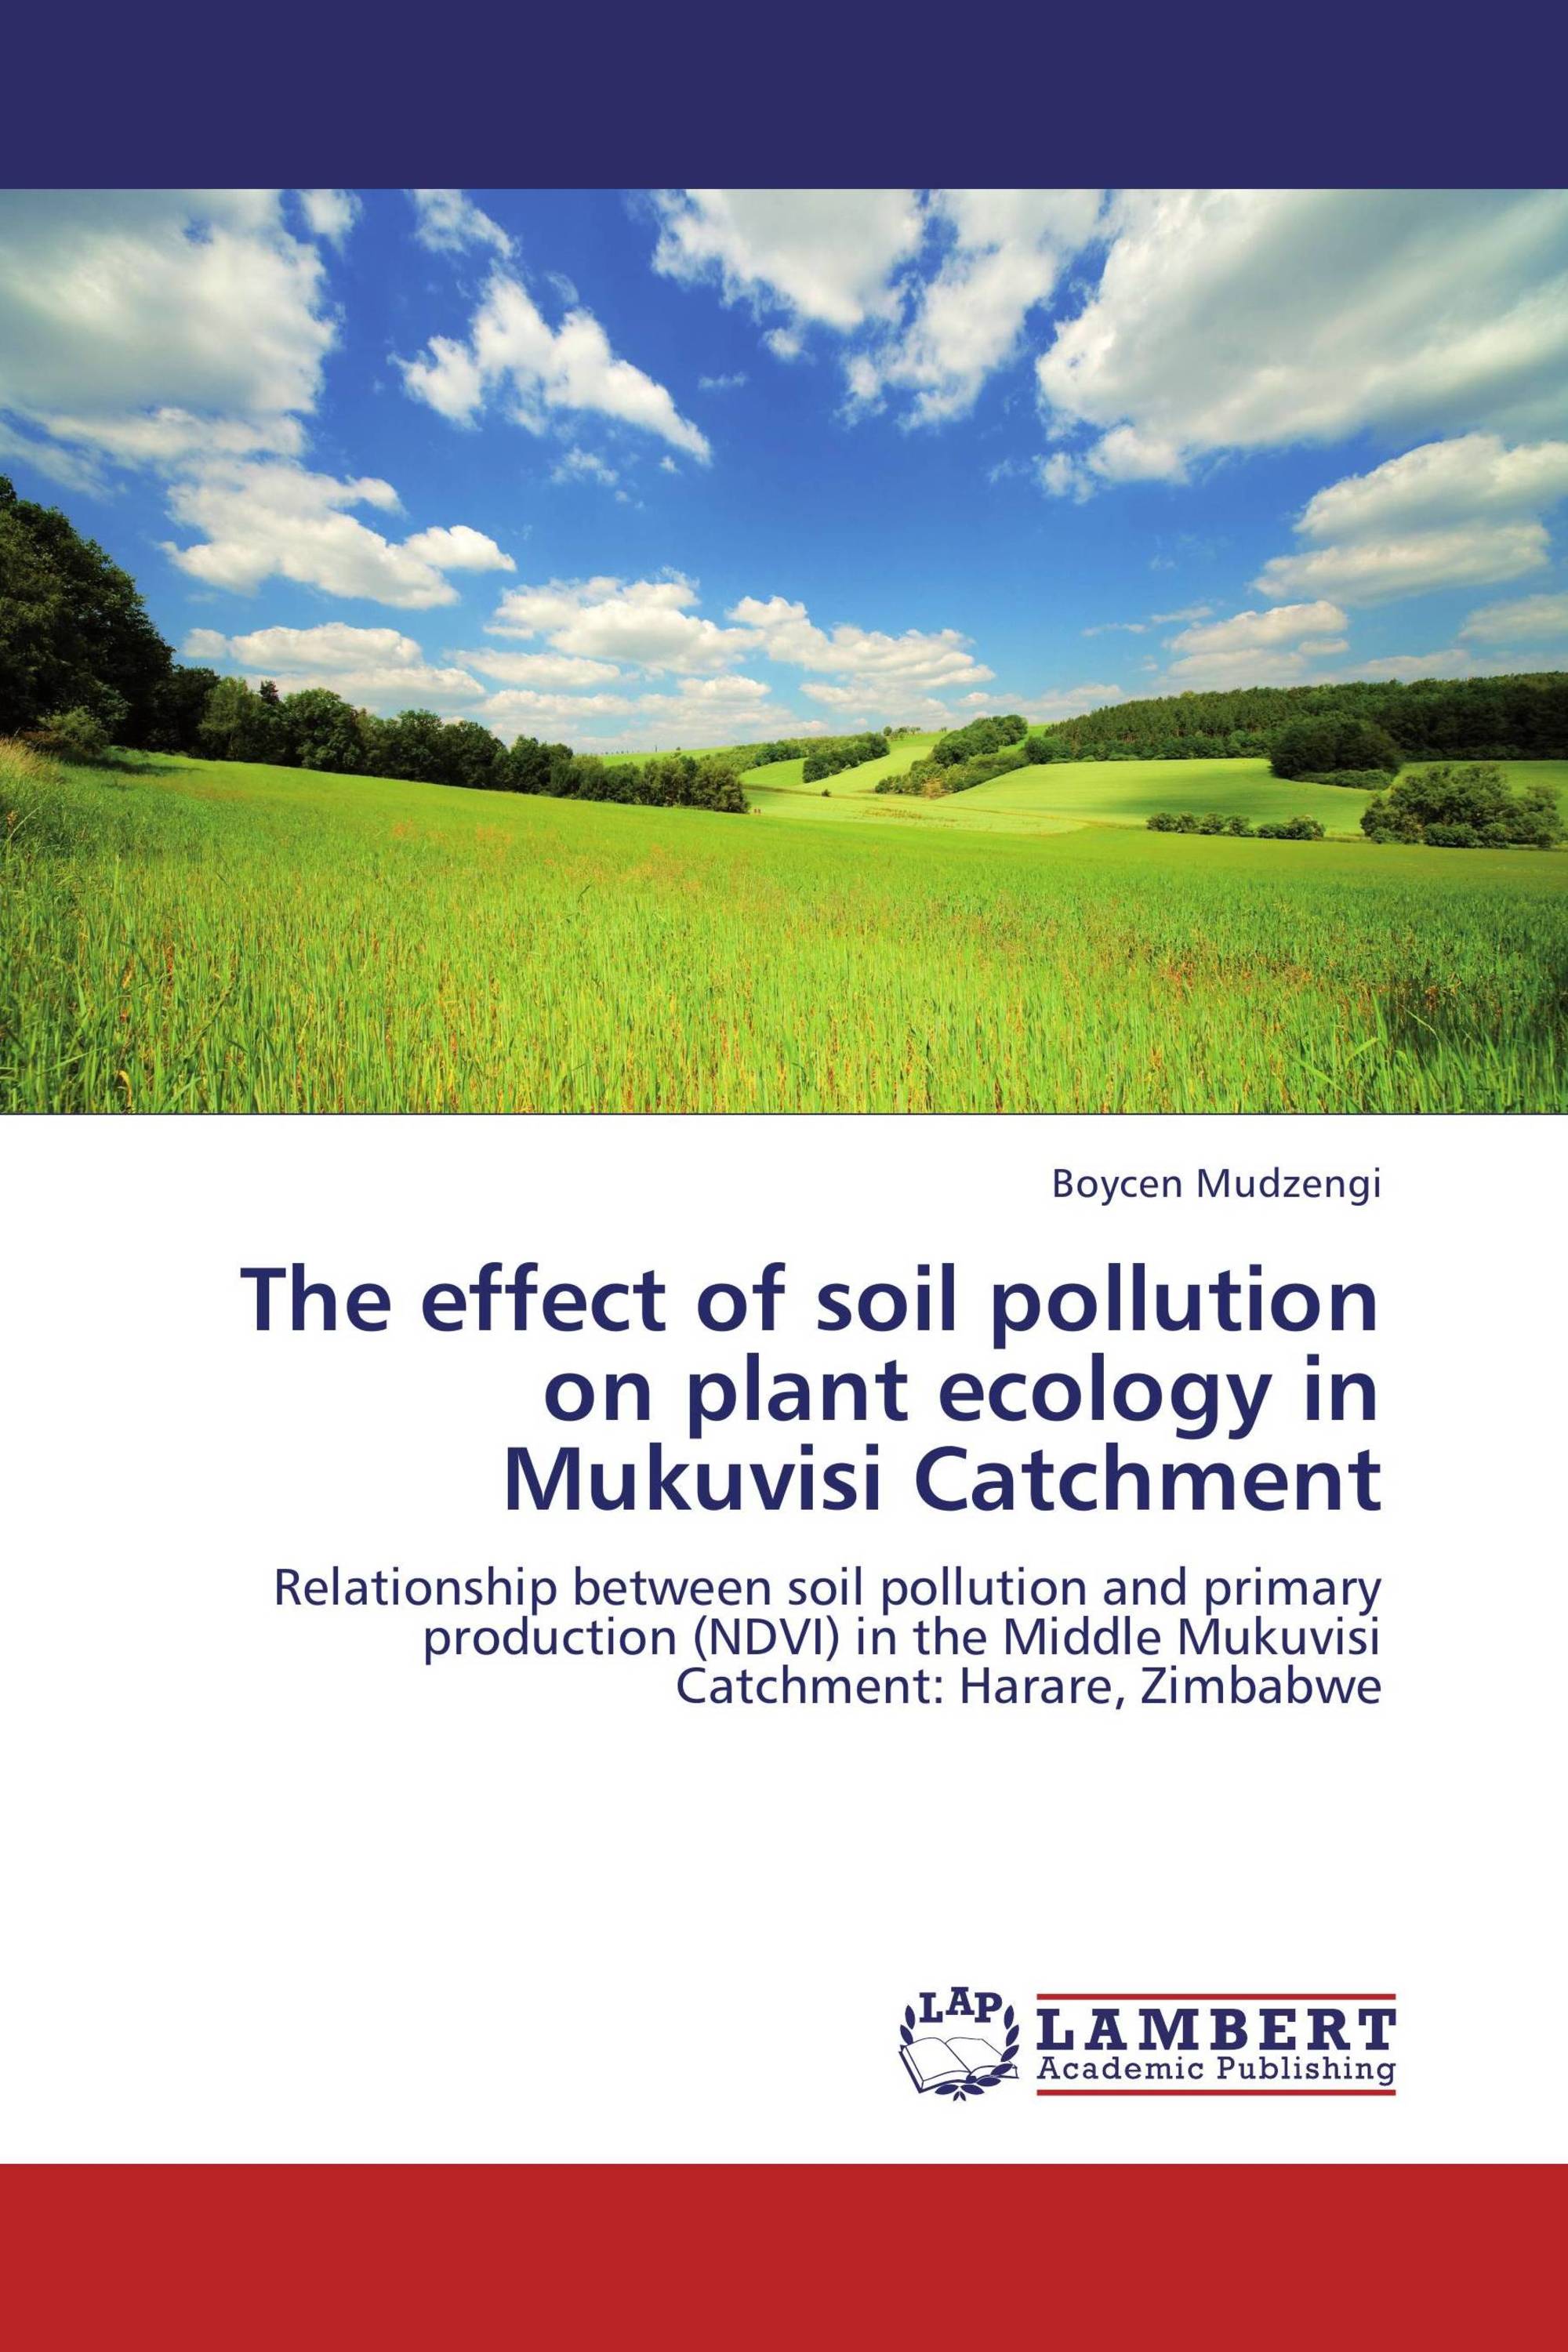 The effect of soil pollution on plant ecology in Mukuvisi Catchment ...